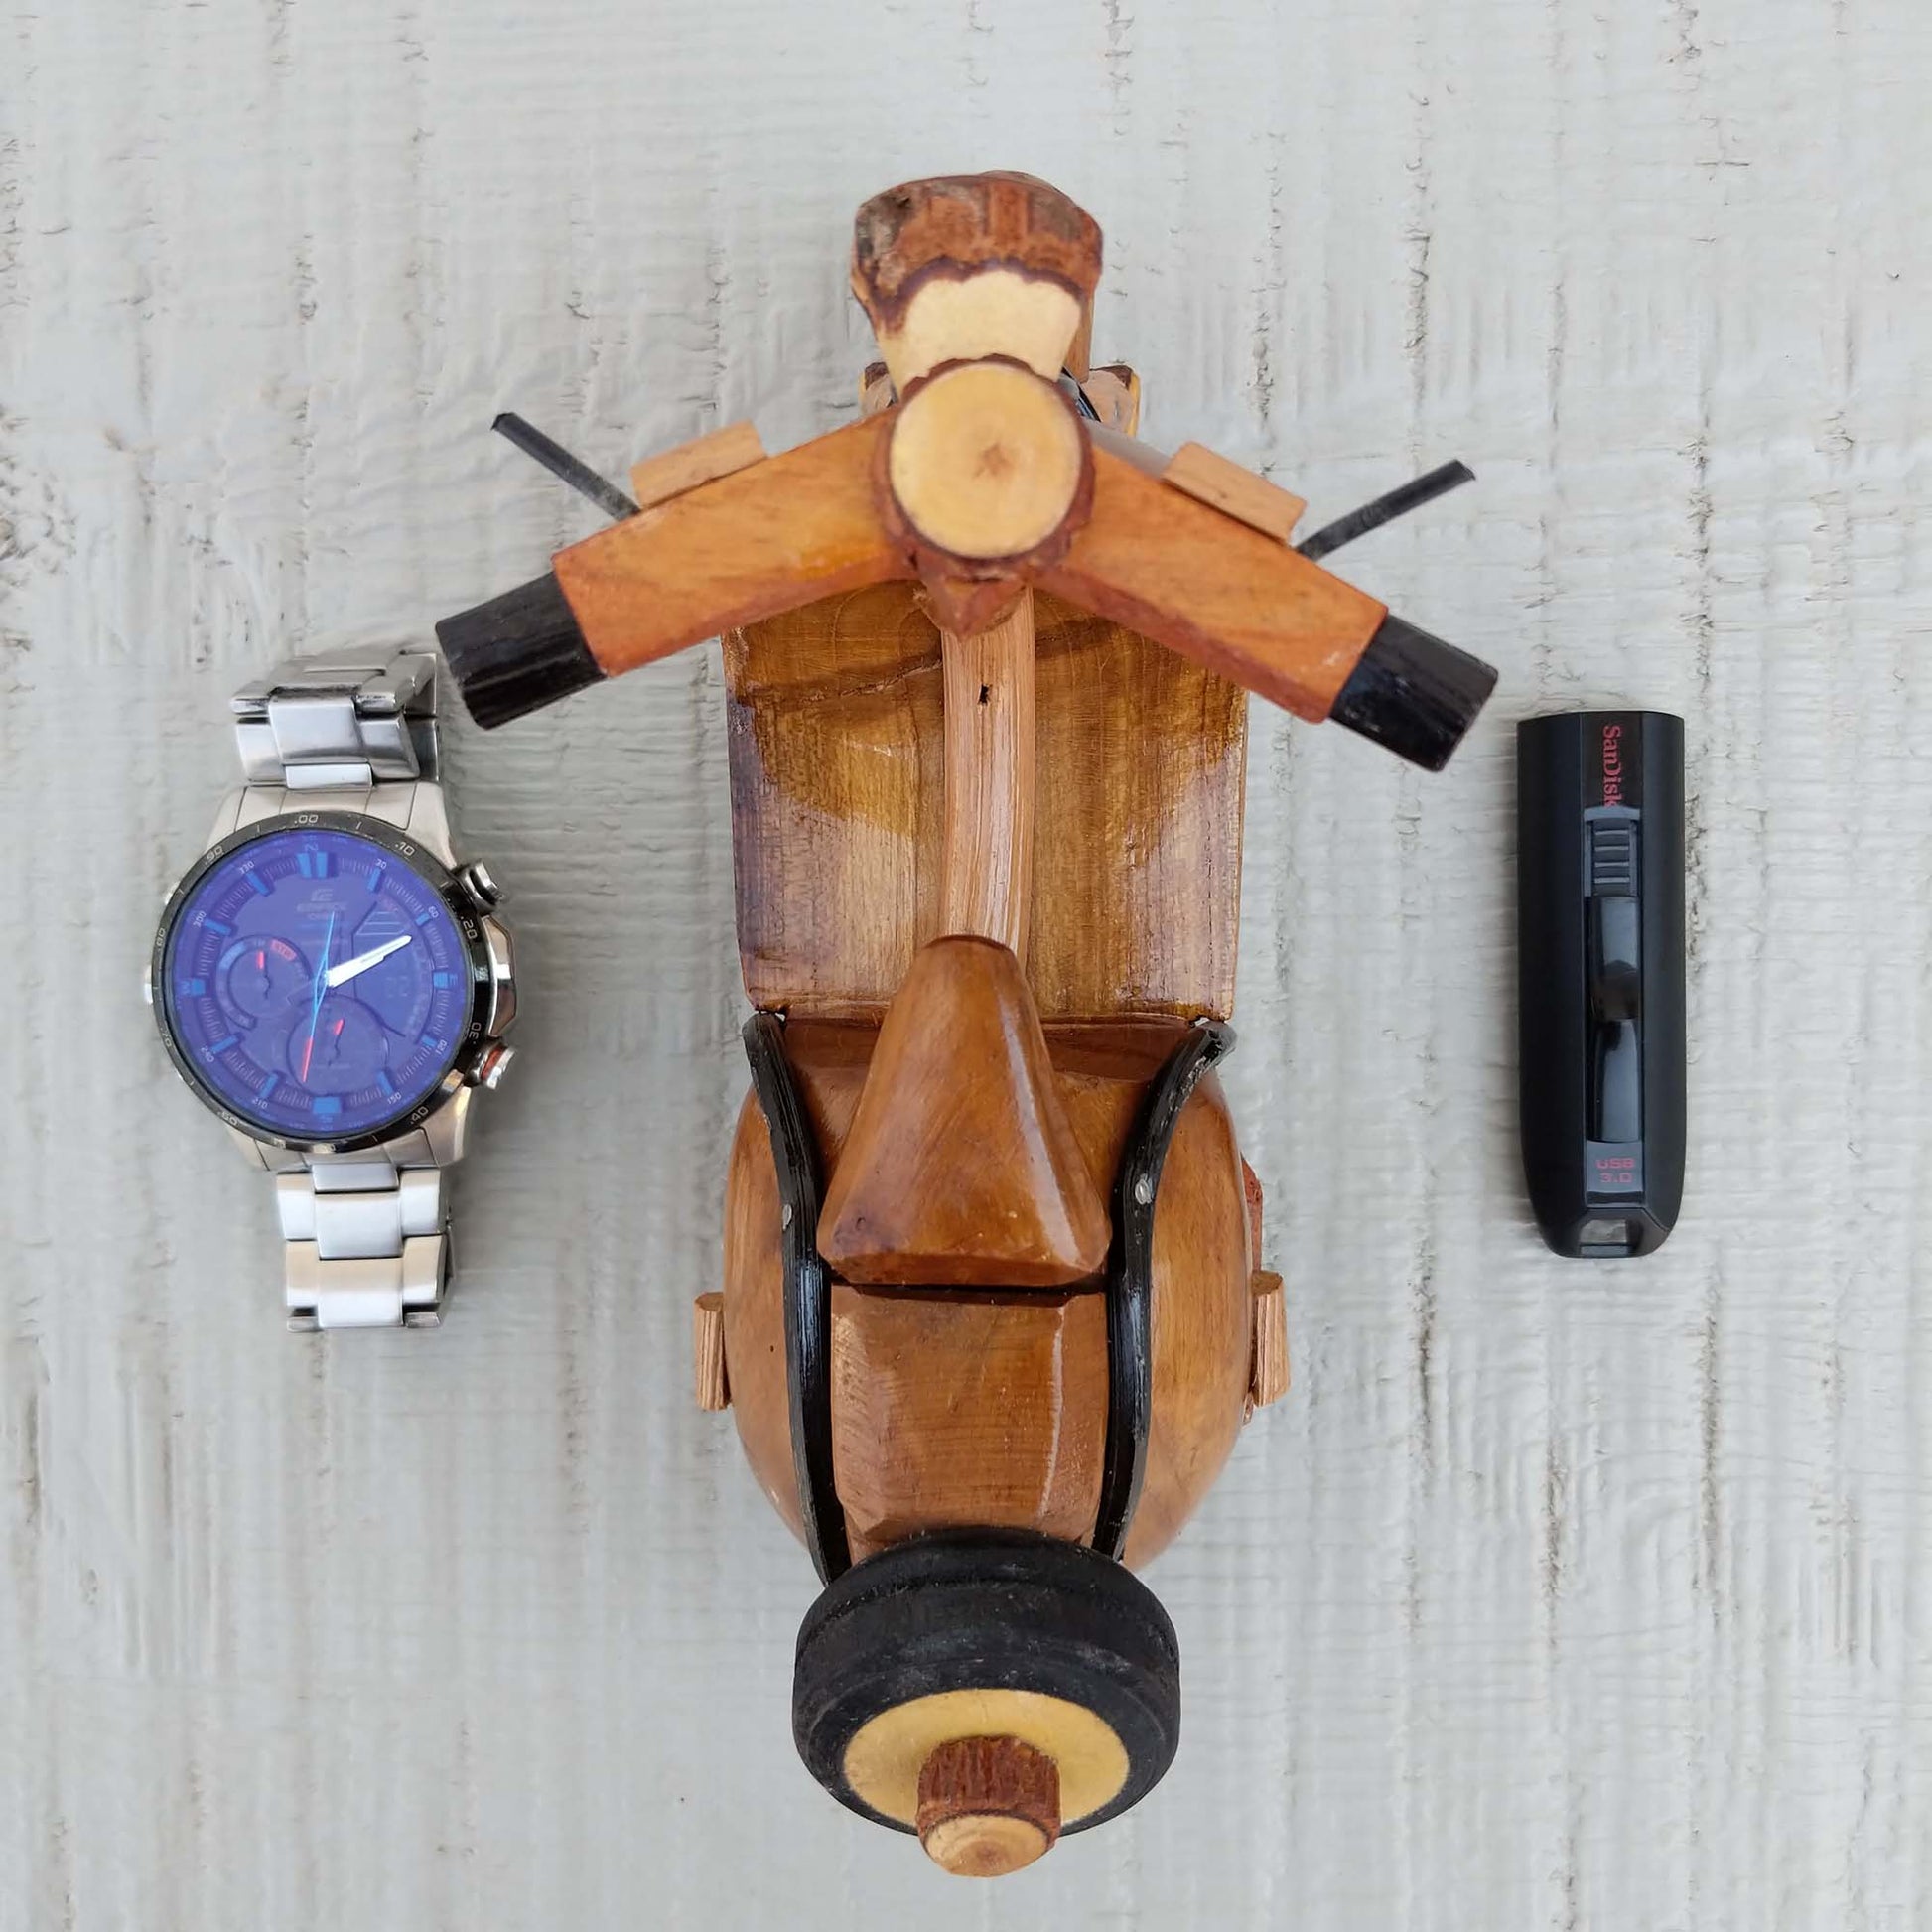 Miniature Vespa scooter hand-crafted from wood